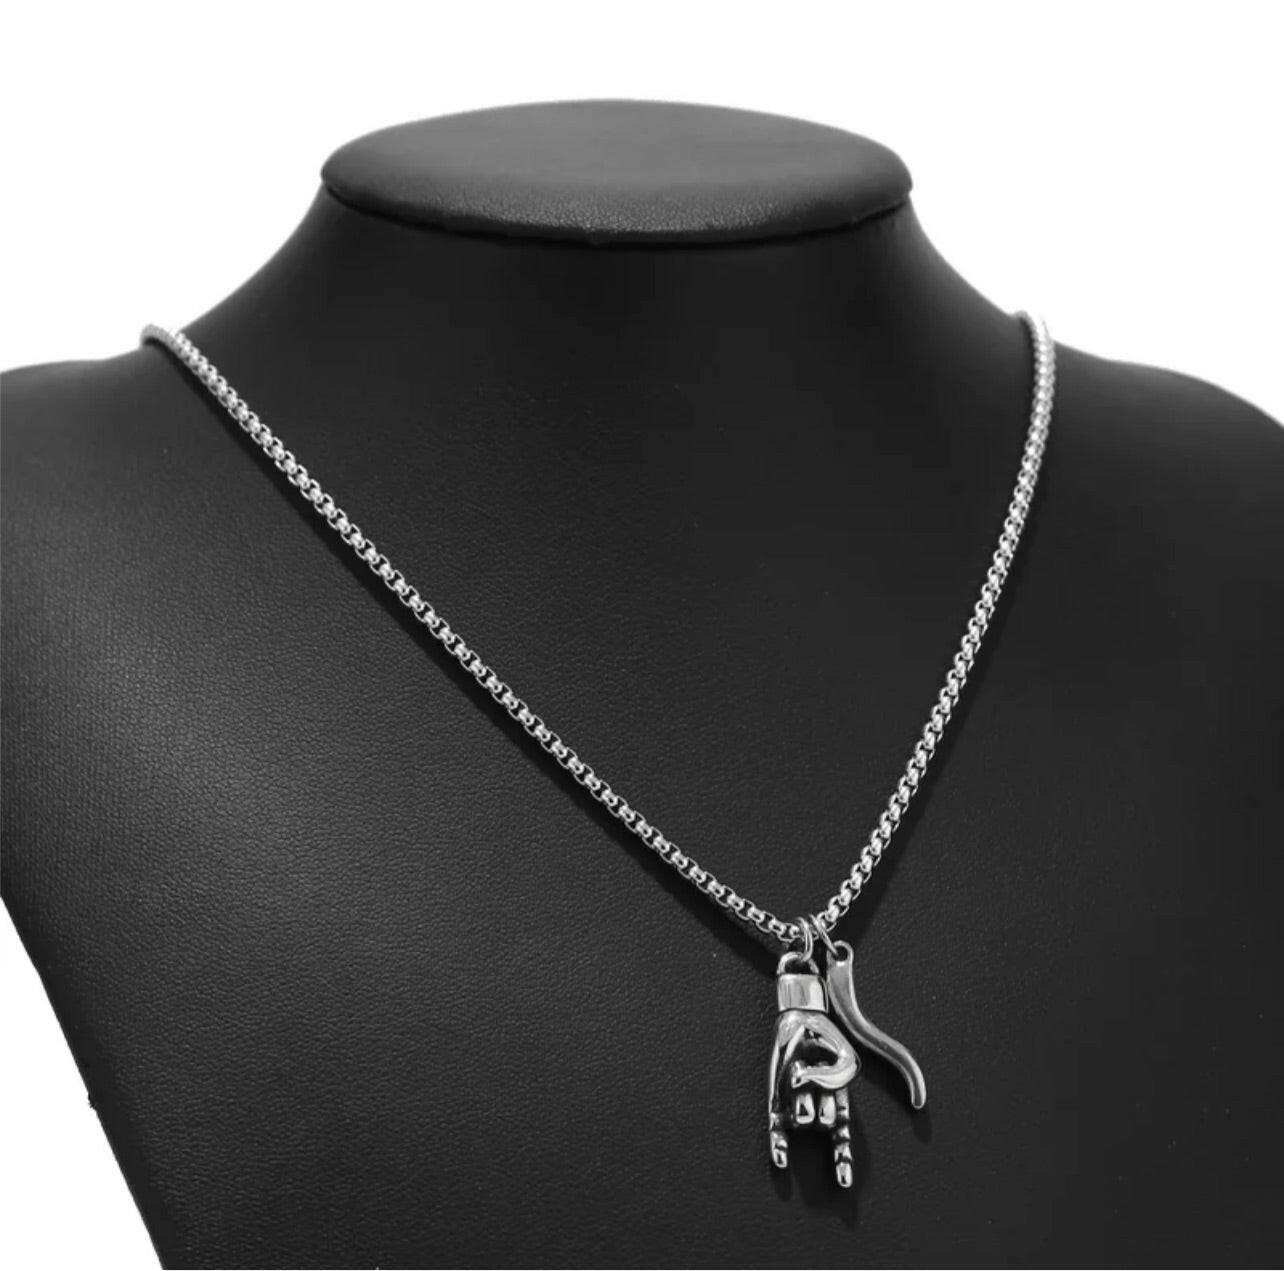 Good Luck Italian Hand and Horn Necklace in Stainless Steel.